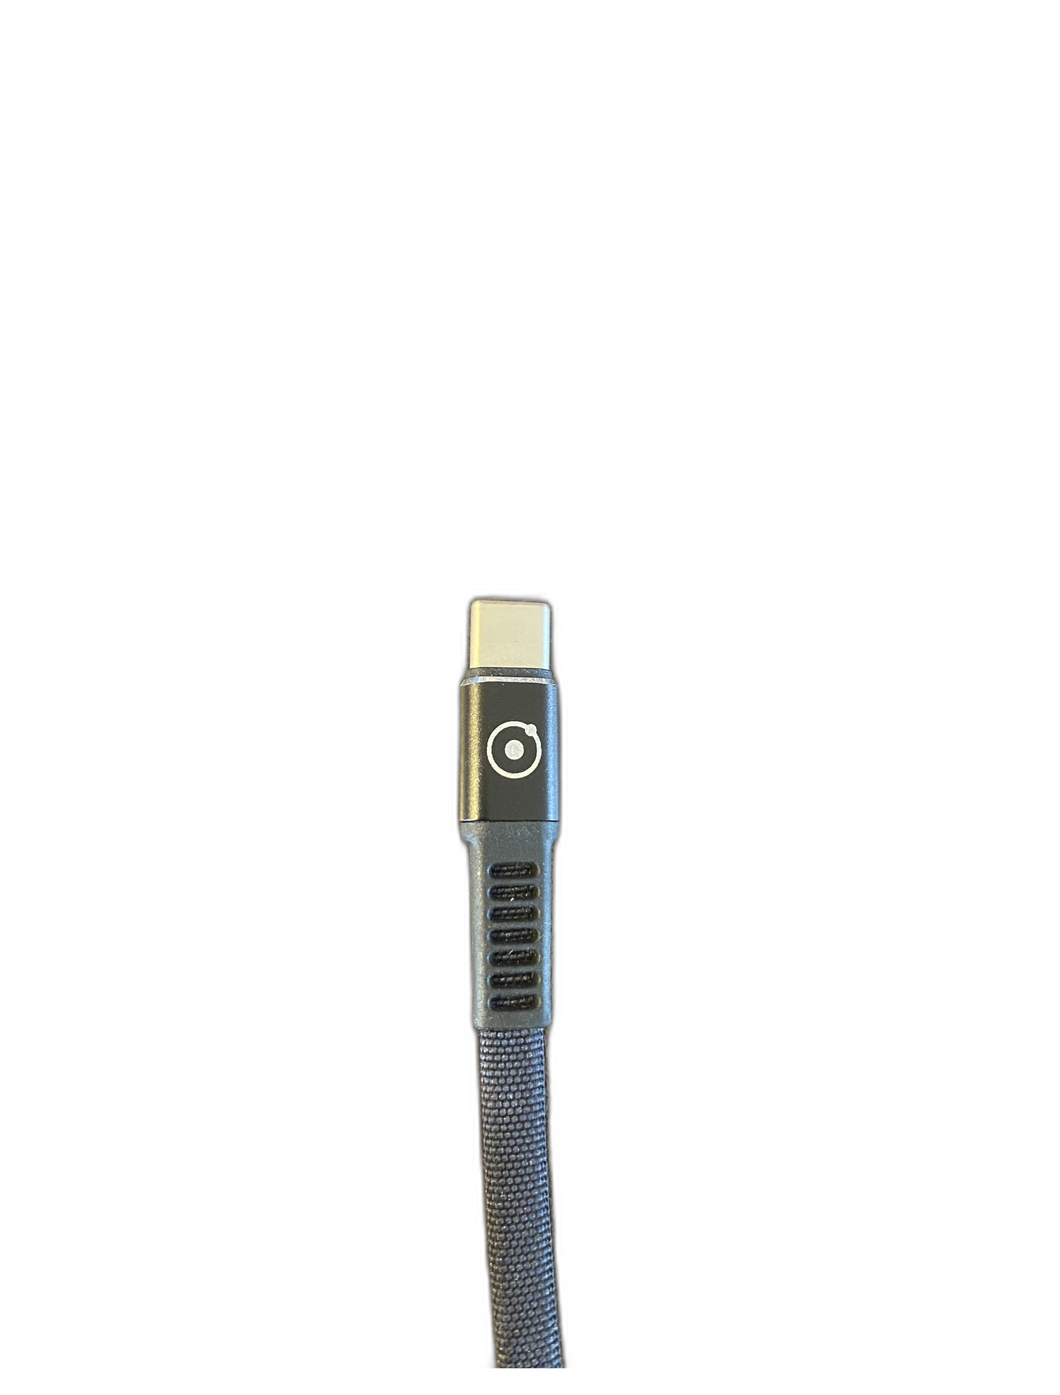 RepOne Charging Cable